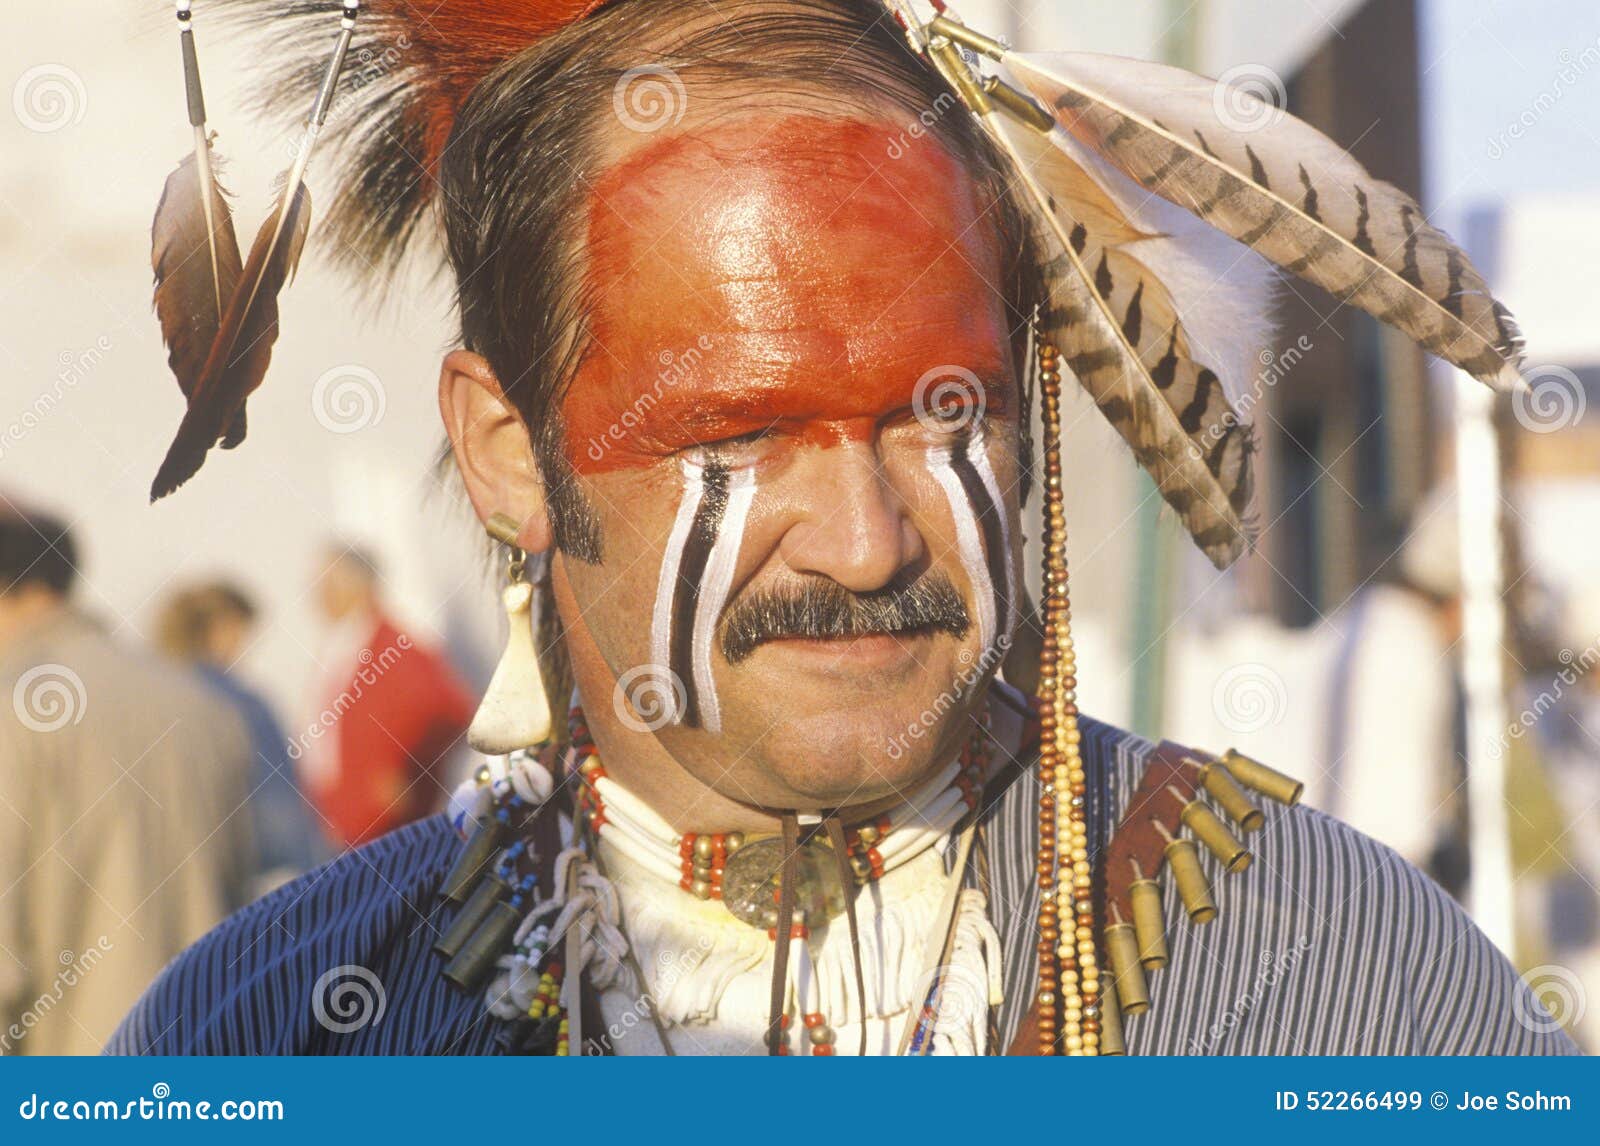 A Modern Man Dressed in Native American Face Paint, Hannibal, MO ...